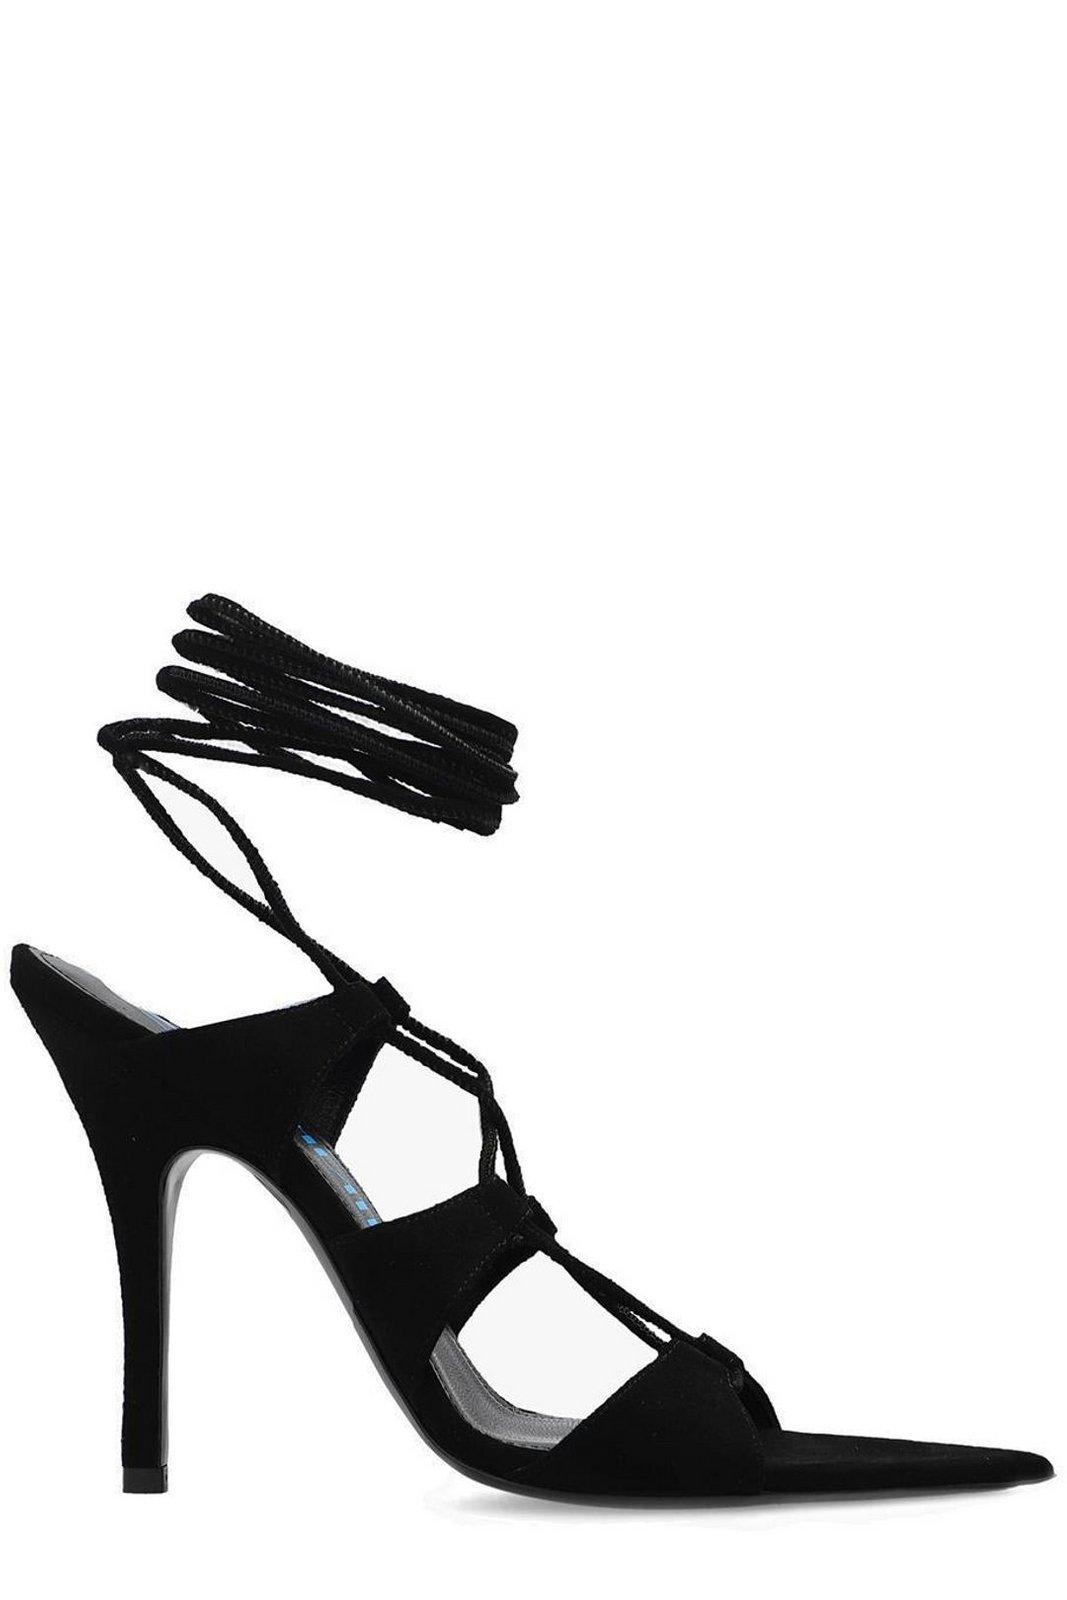 Renee Lace-up Ankle Strap Sandals